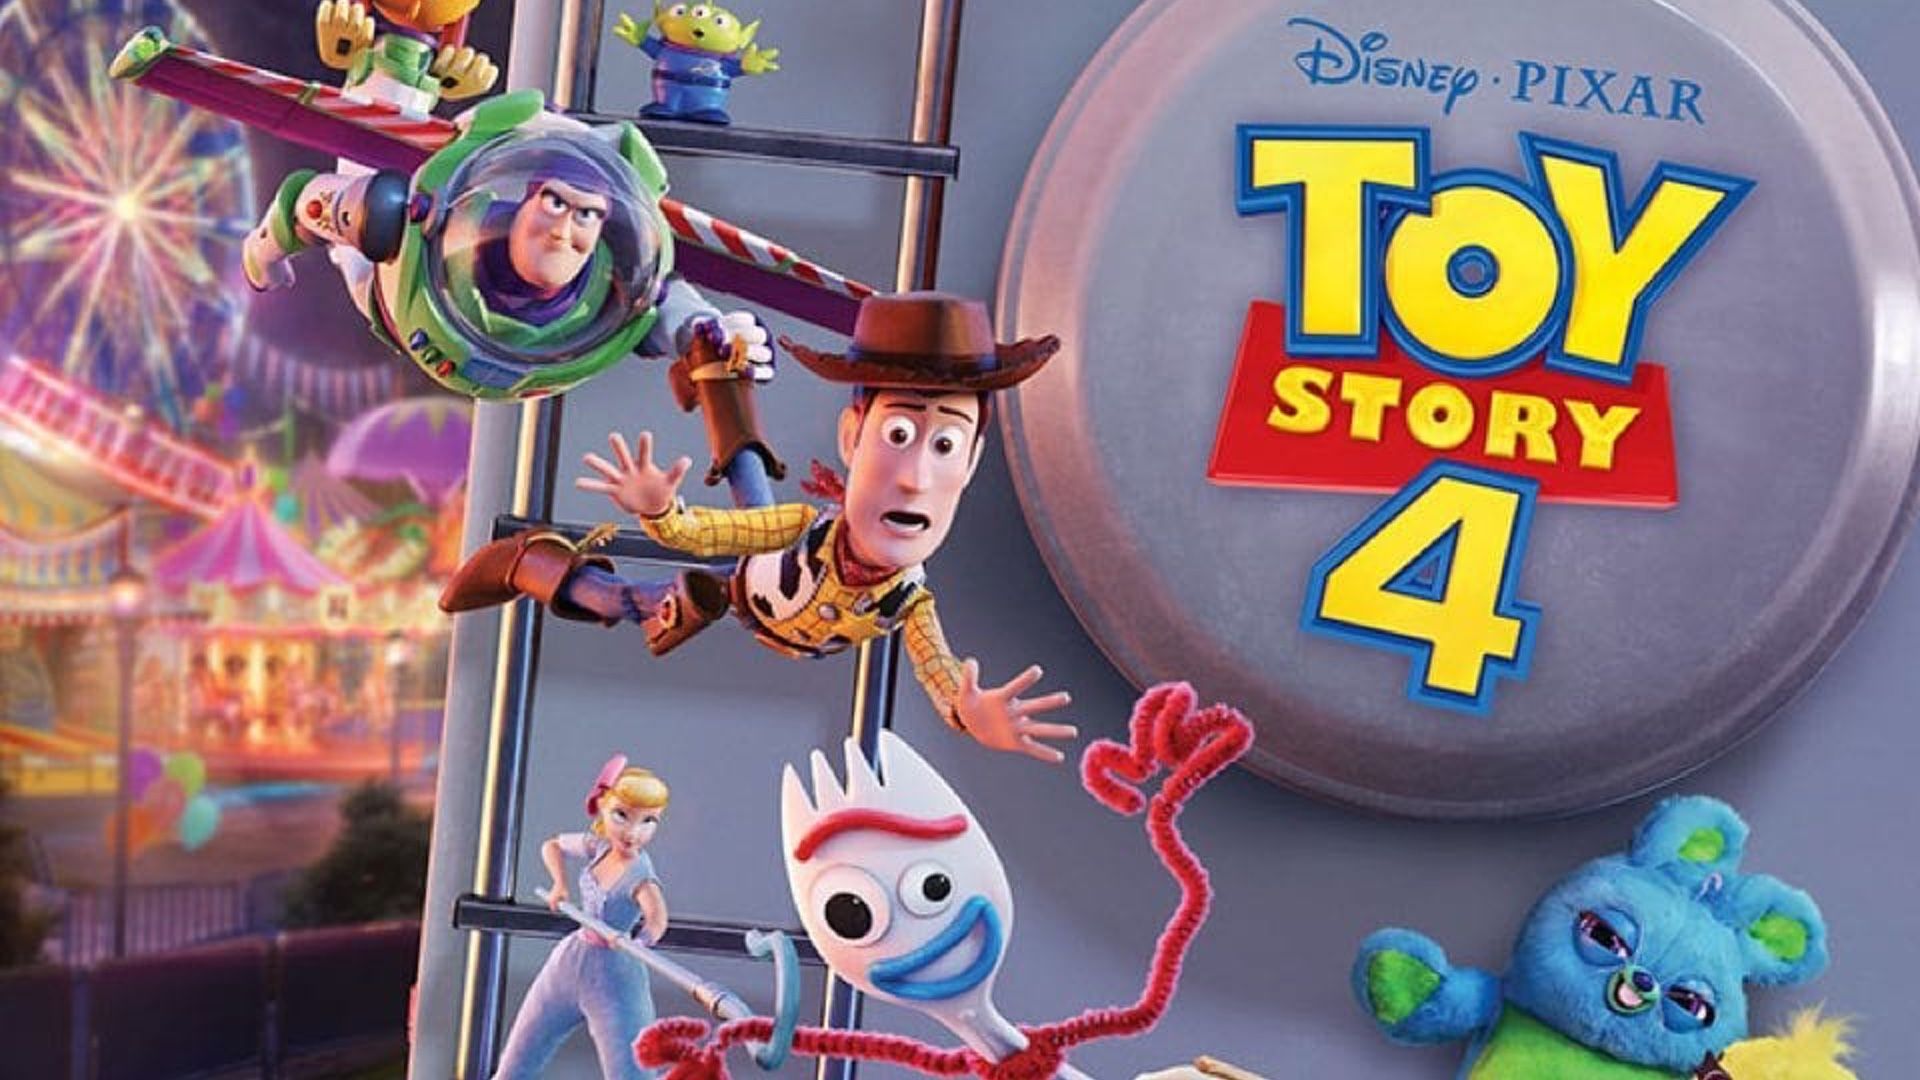 Free download TOY STORY 4 Gets a New with More Footage a Poster and [1920x1080] for your Desktop, Mobile & Tablet. Explore Pixar's Toy Story 4 Wallpaper